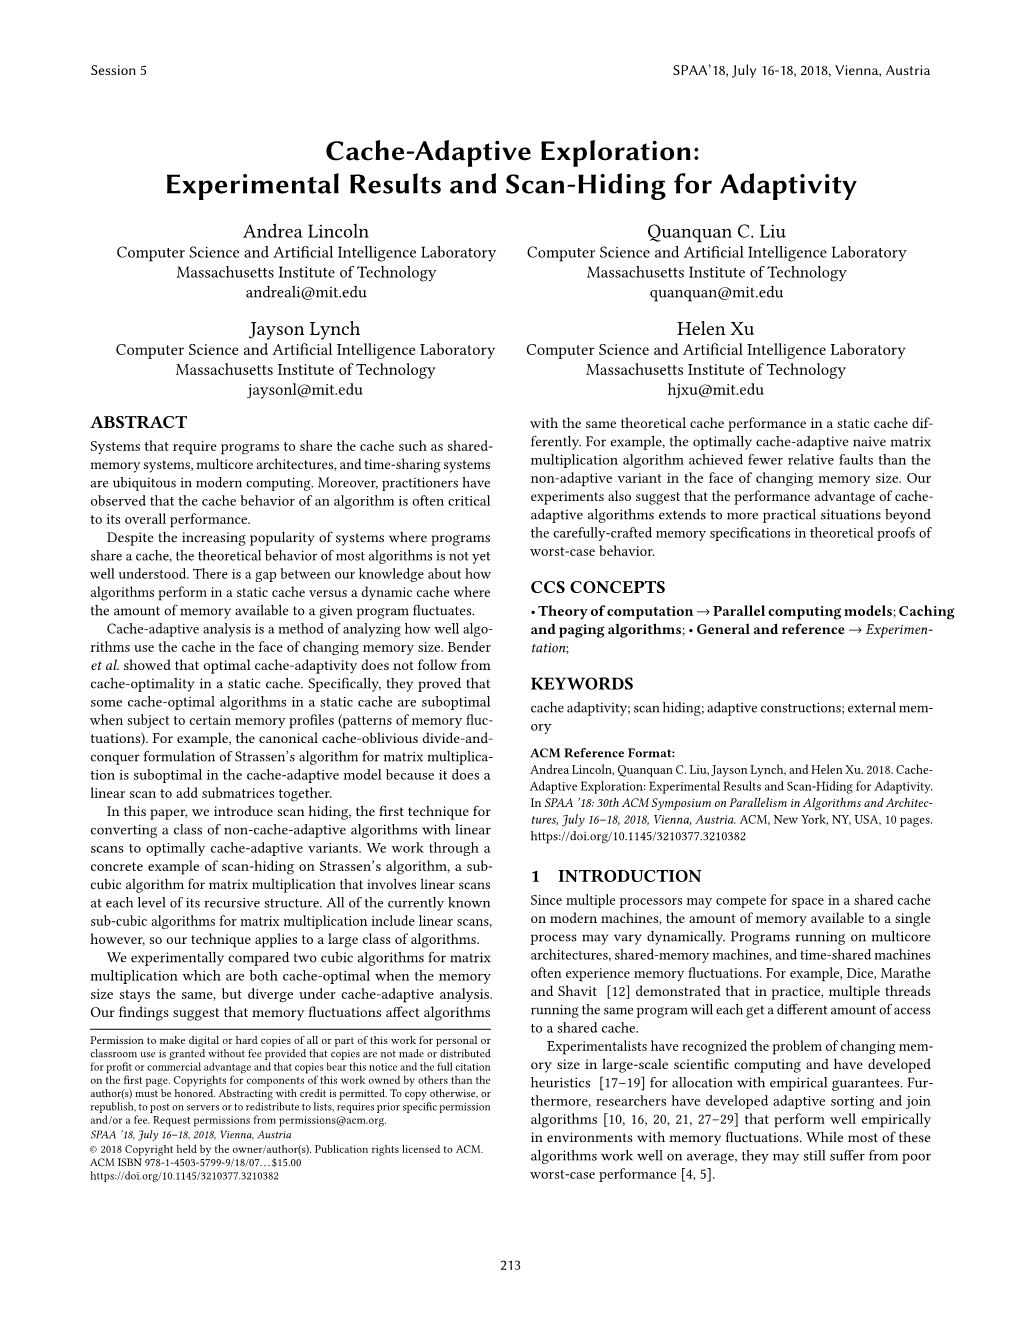 Cache-Adaptive Exploration: Experimental Results and Scan-Hiding for Adaptivity